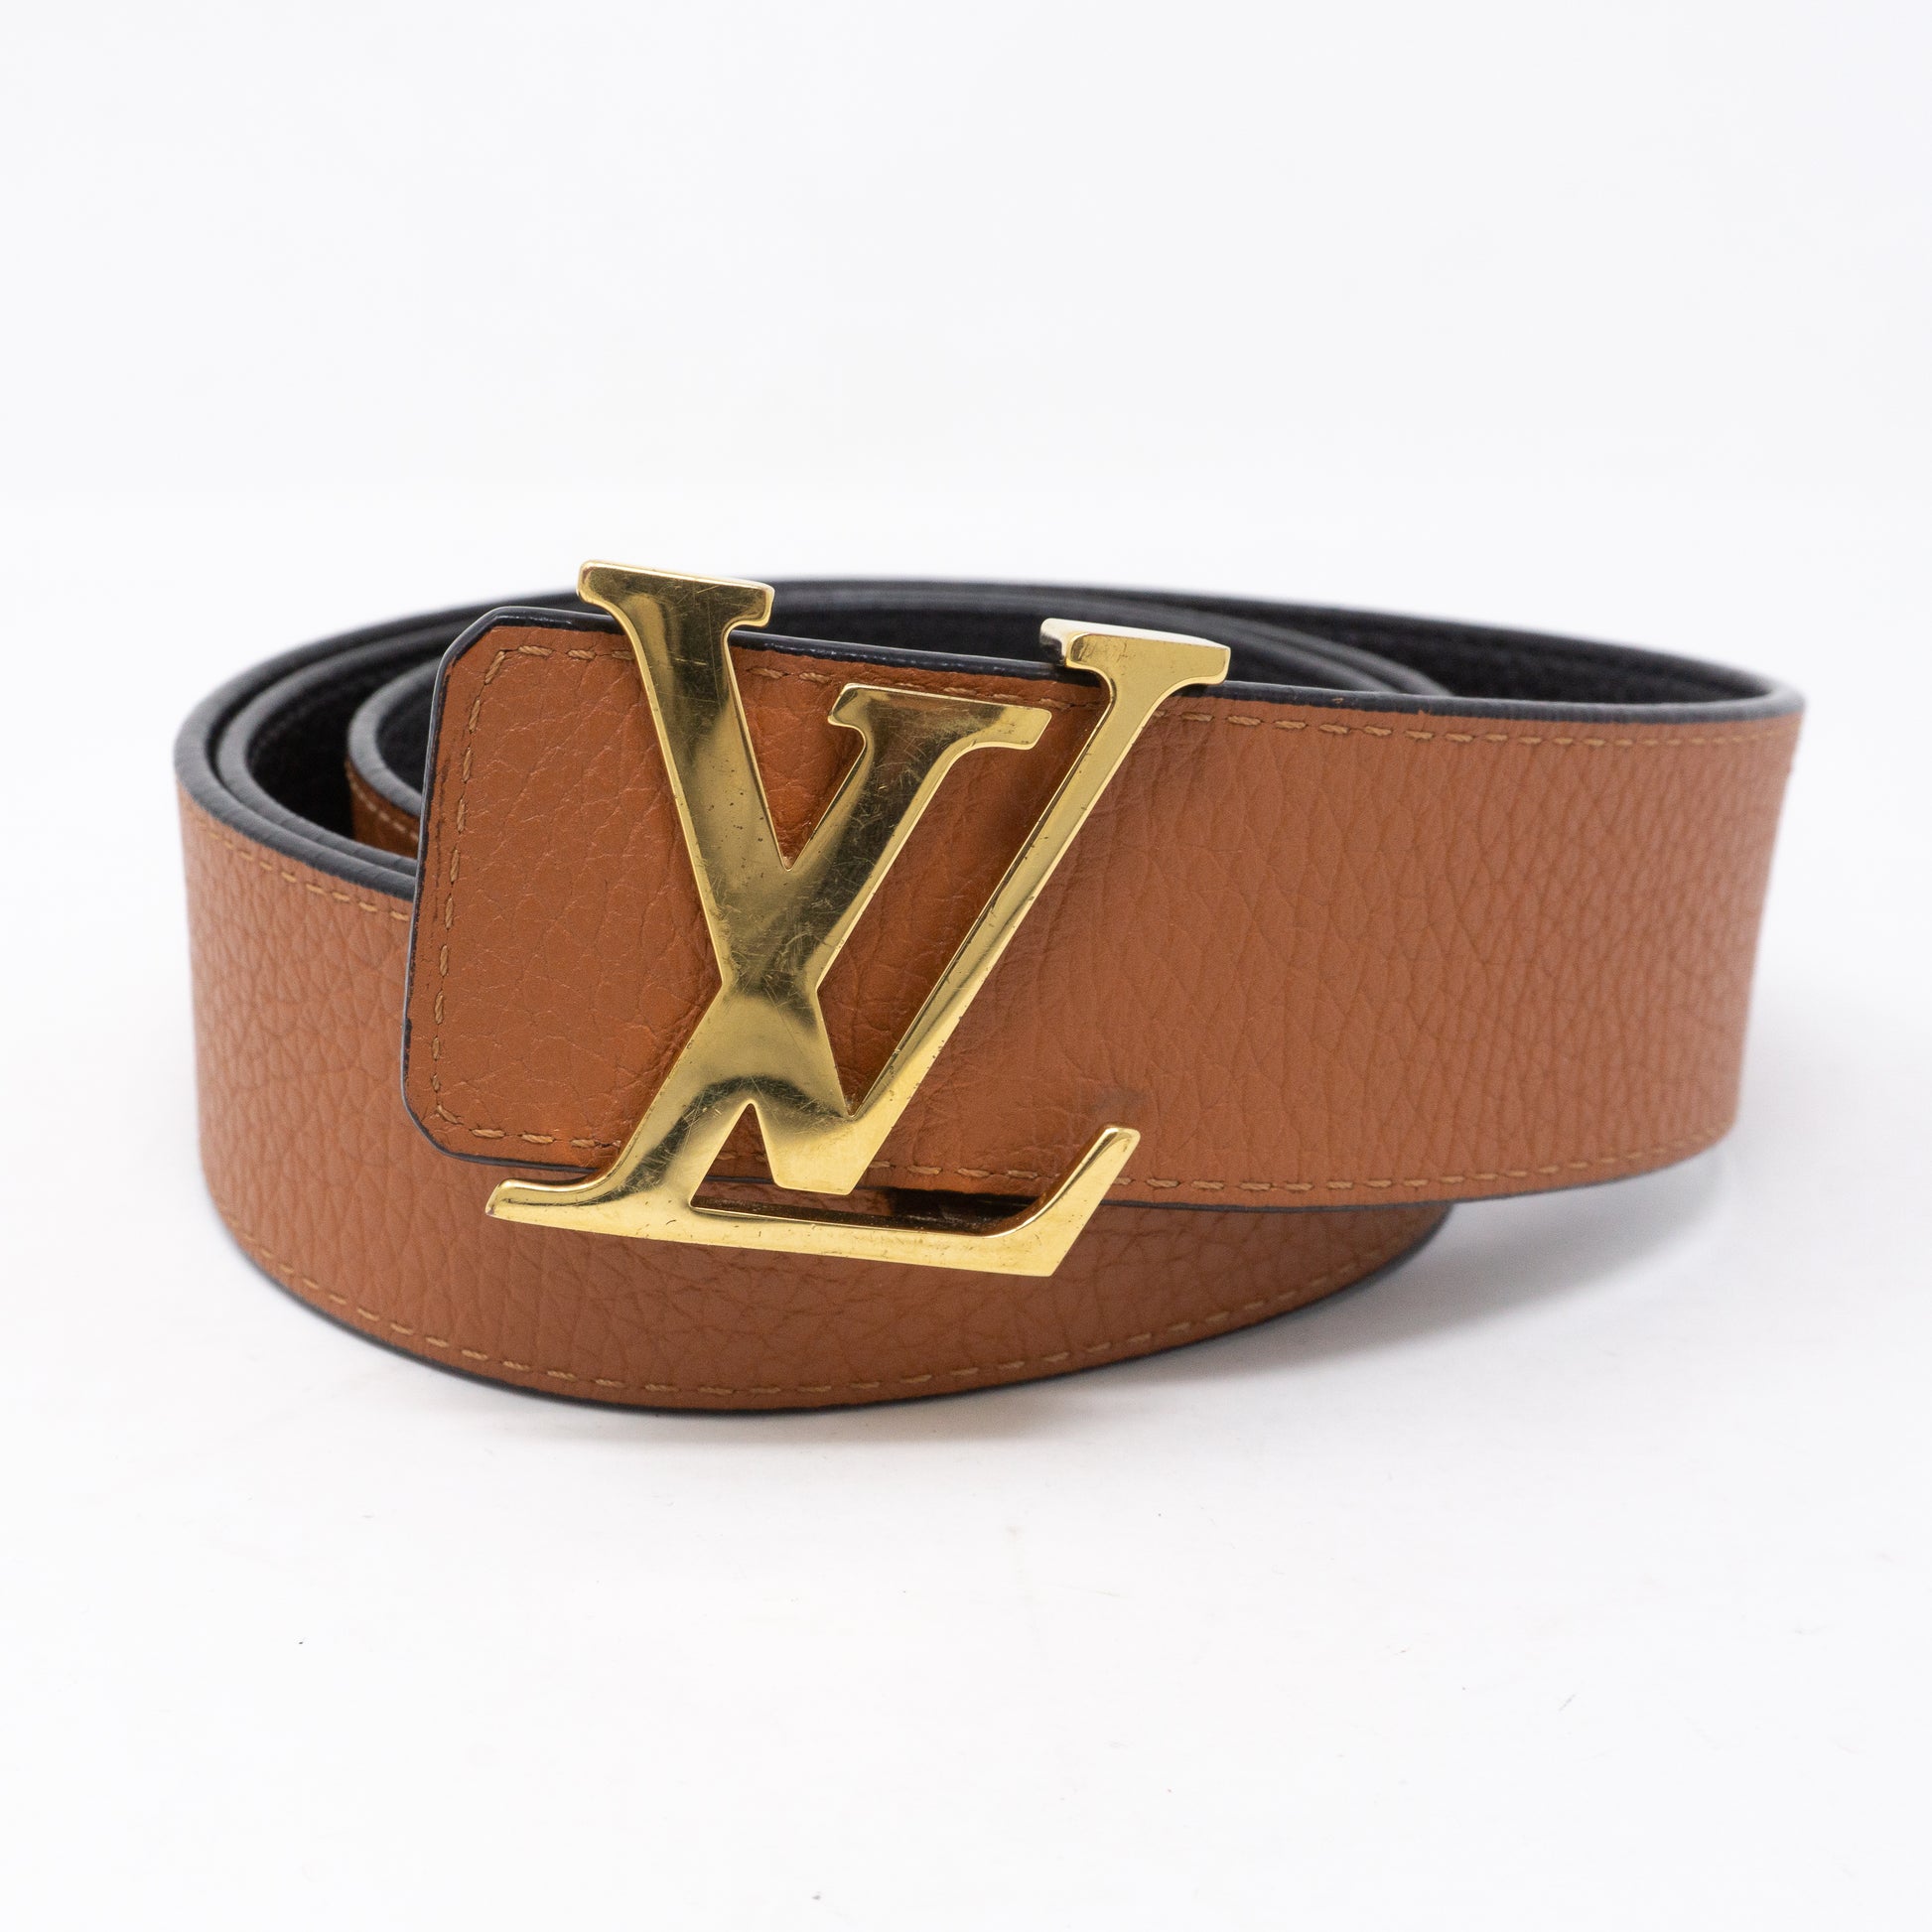 Initiales cloth belt Louis Vuitton Brown size 100 cm in Cloth - 31744906